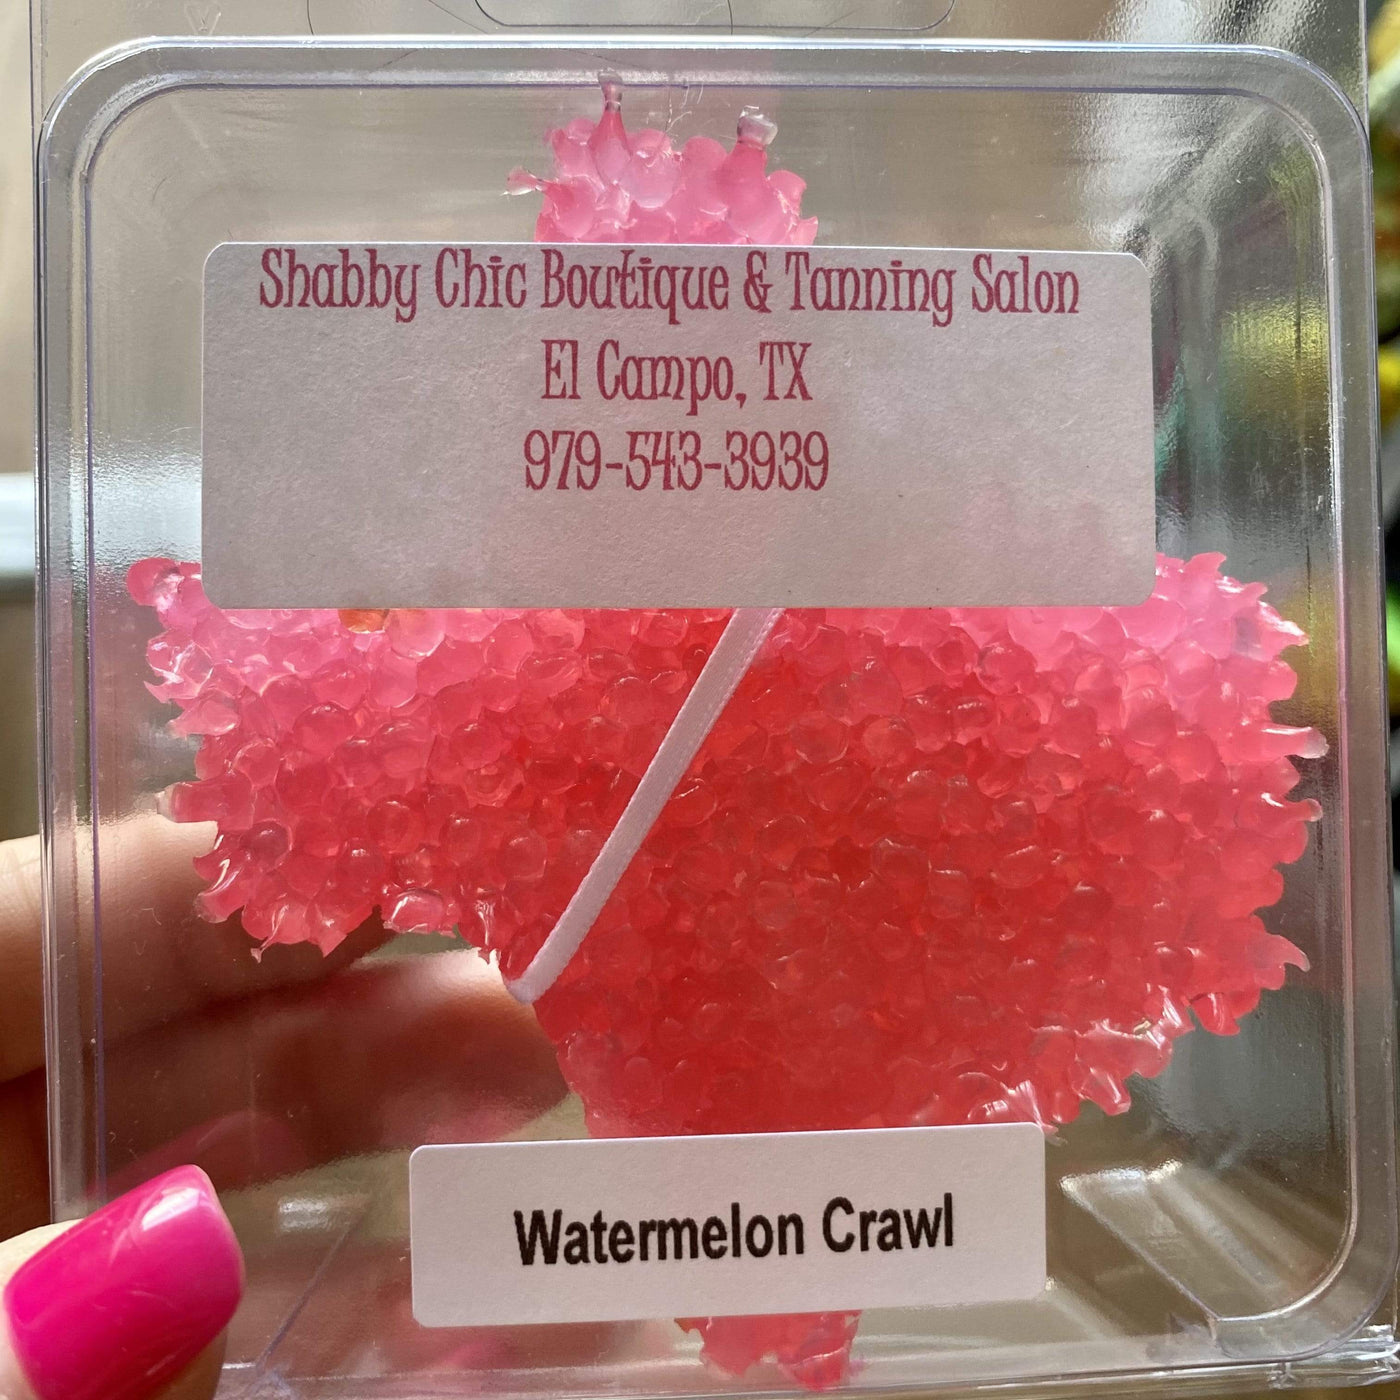 Watermelon Crawl Car Aromies Shabby Chic Boutique and Tanning Salon